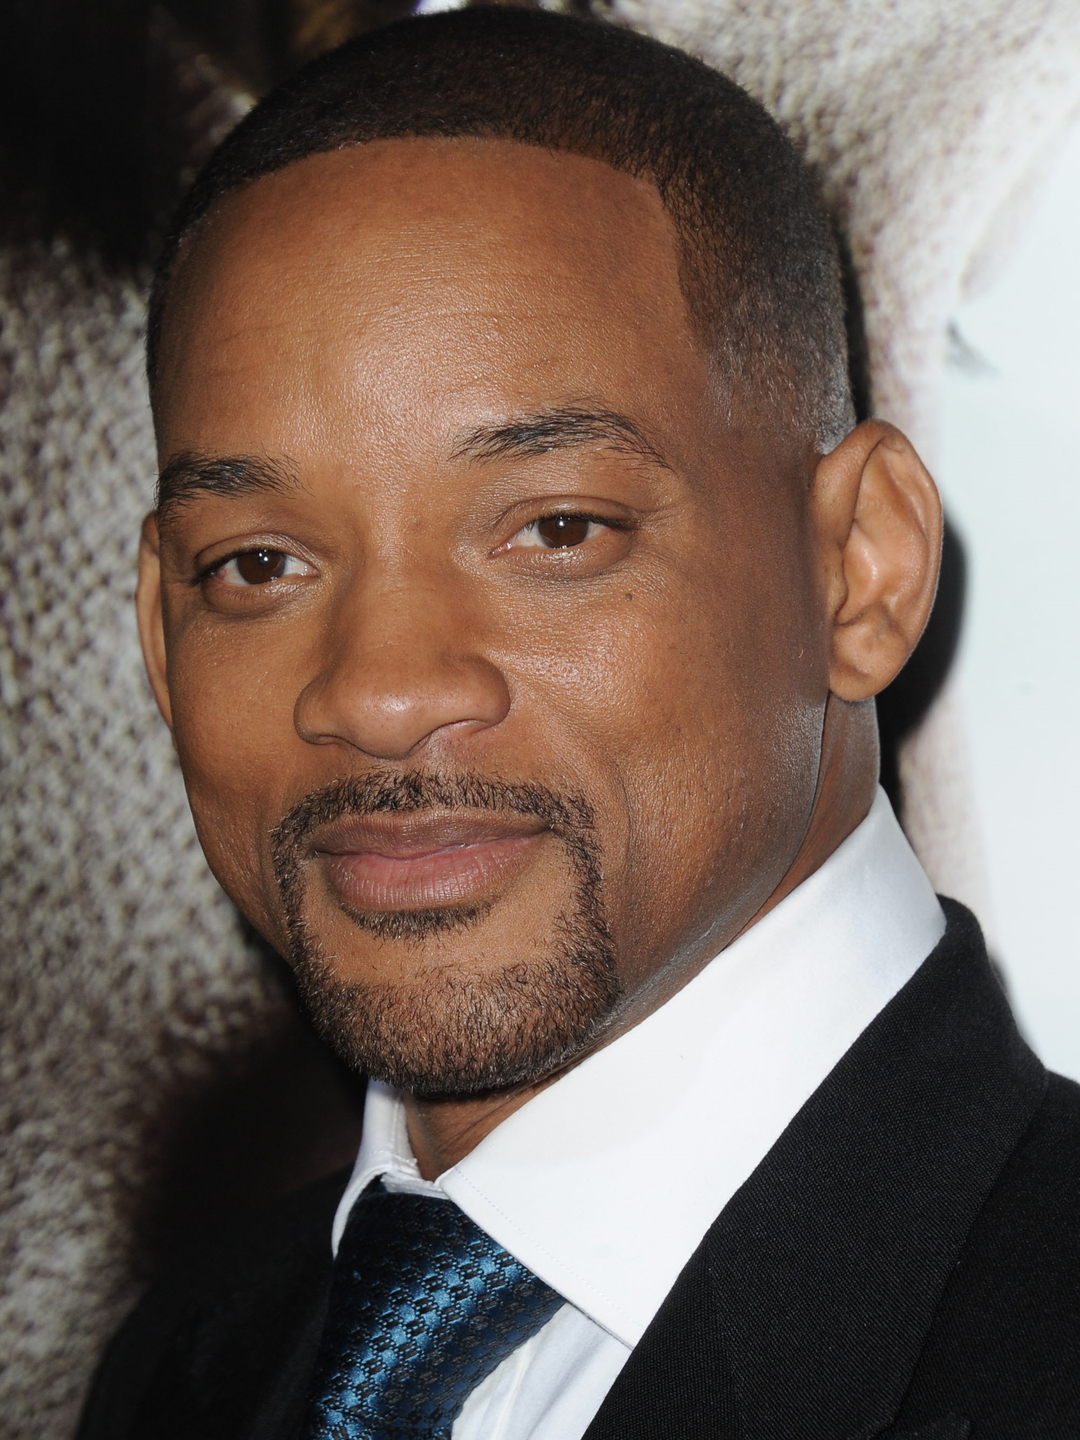 Will Smith who is he